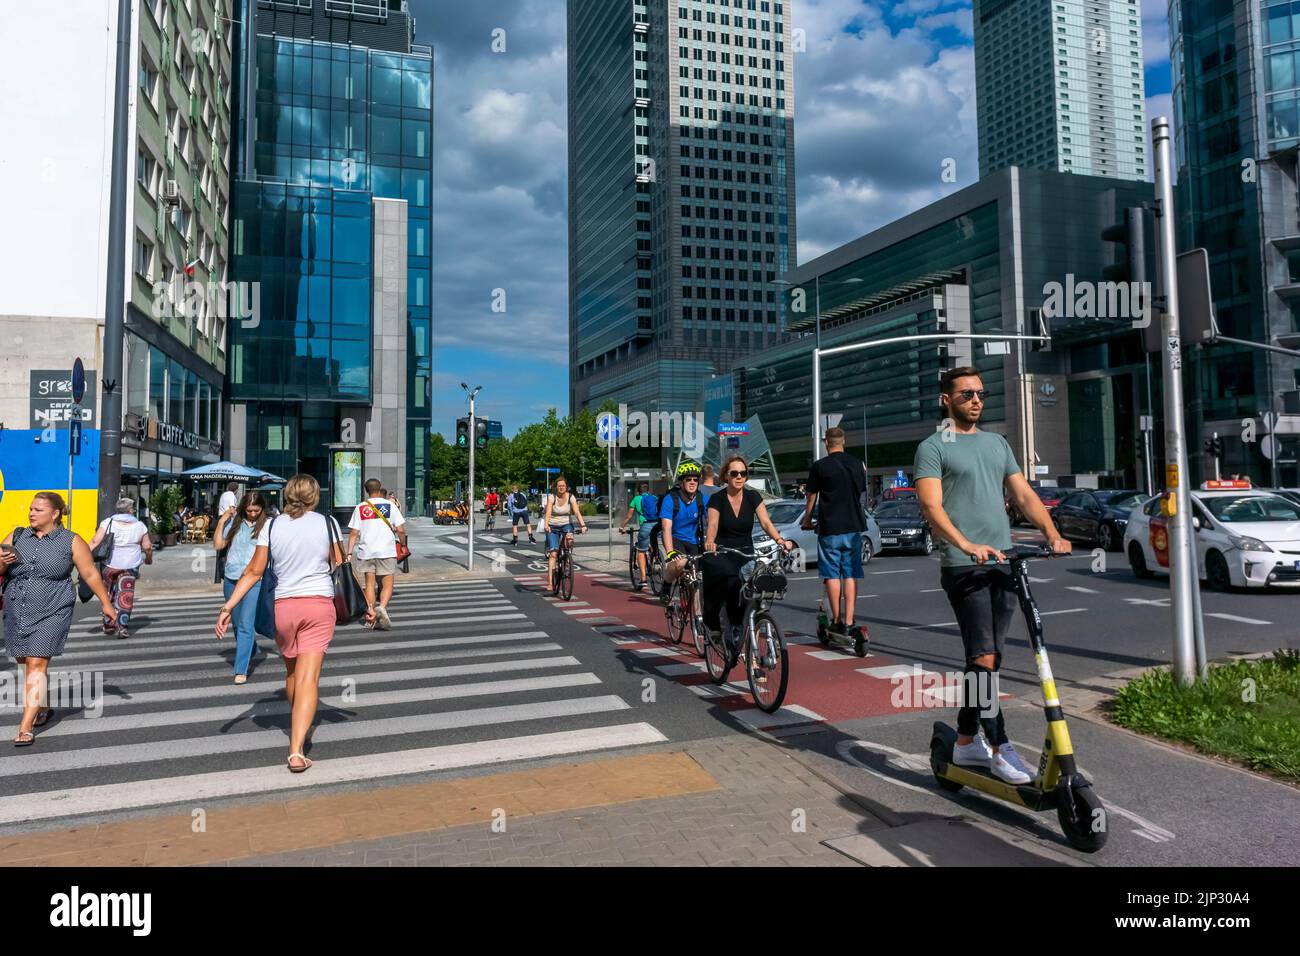 Warsaw, Poland, Street Scene, People Bicycling, Business Center Stock Photo